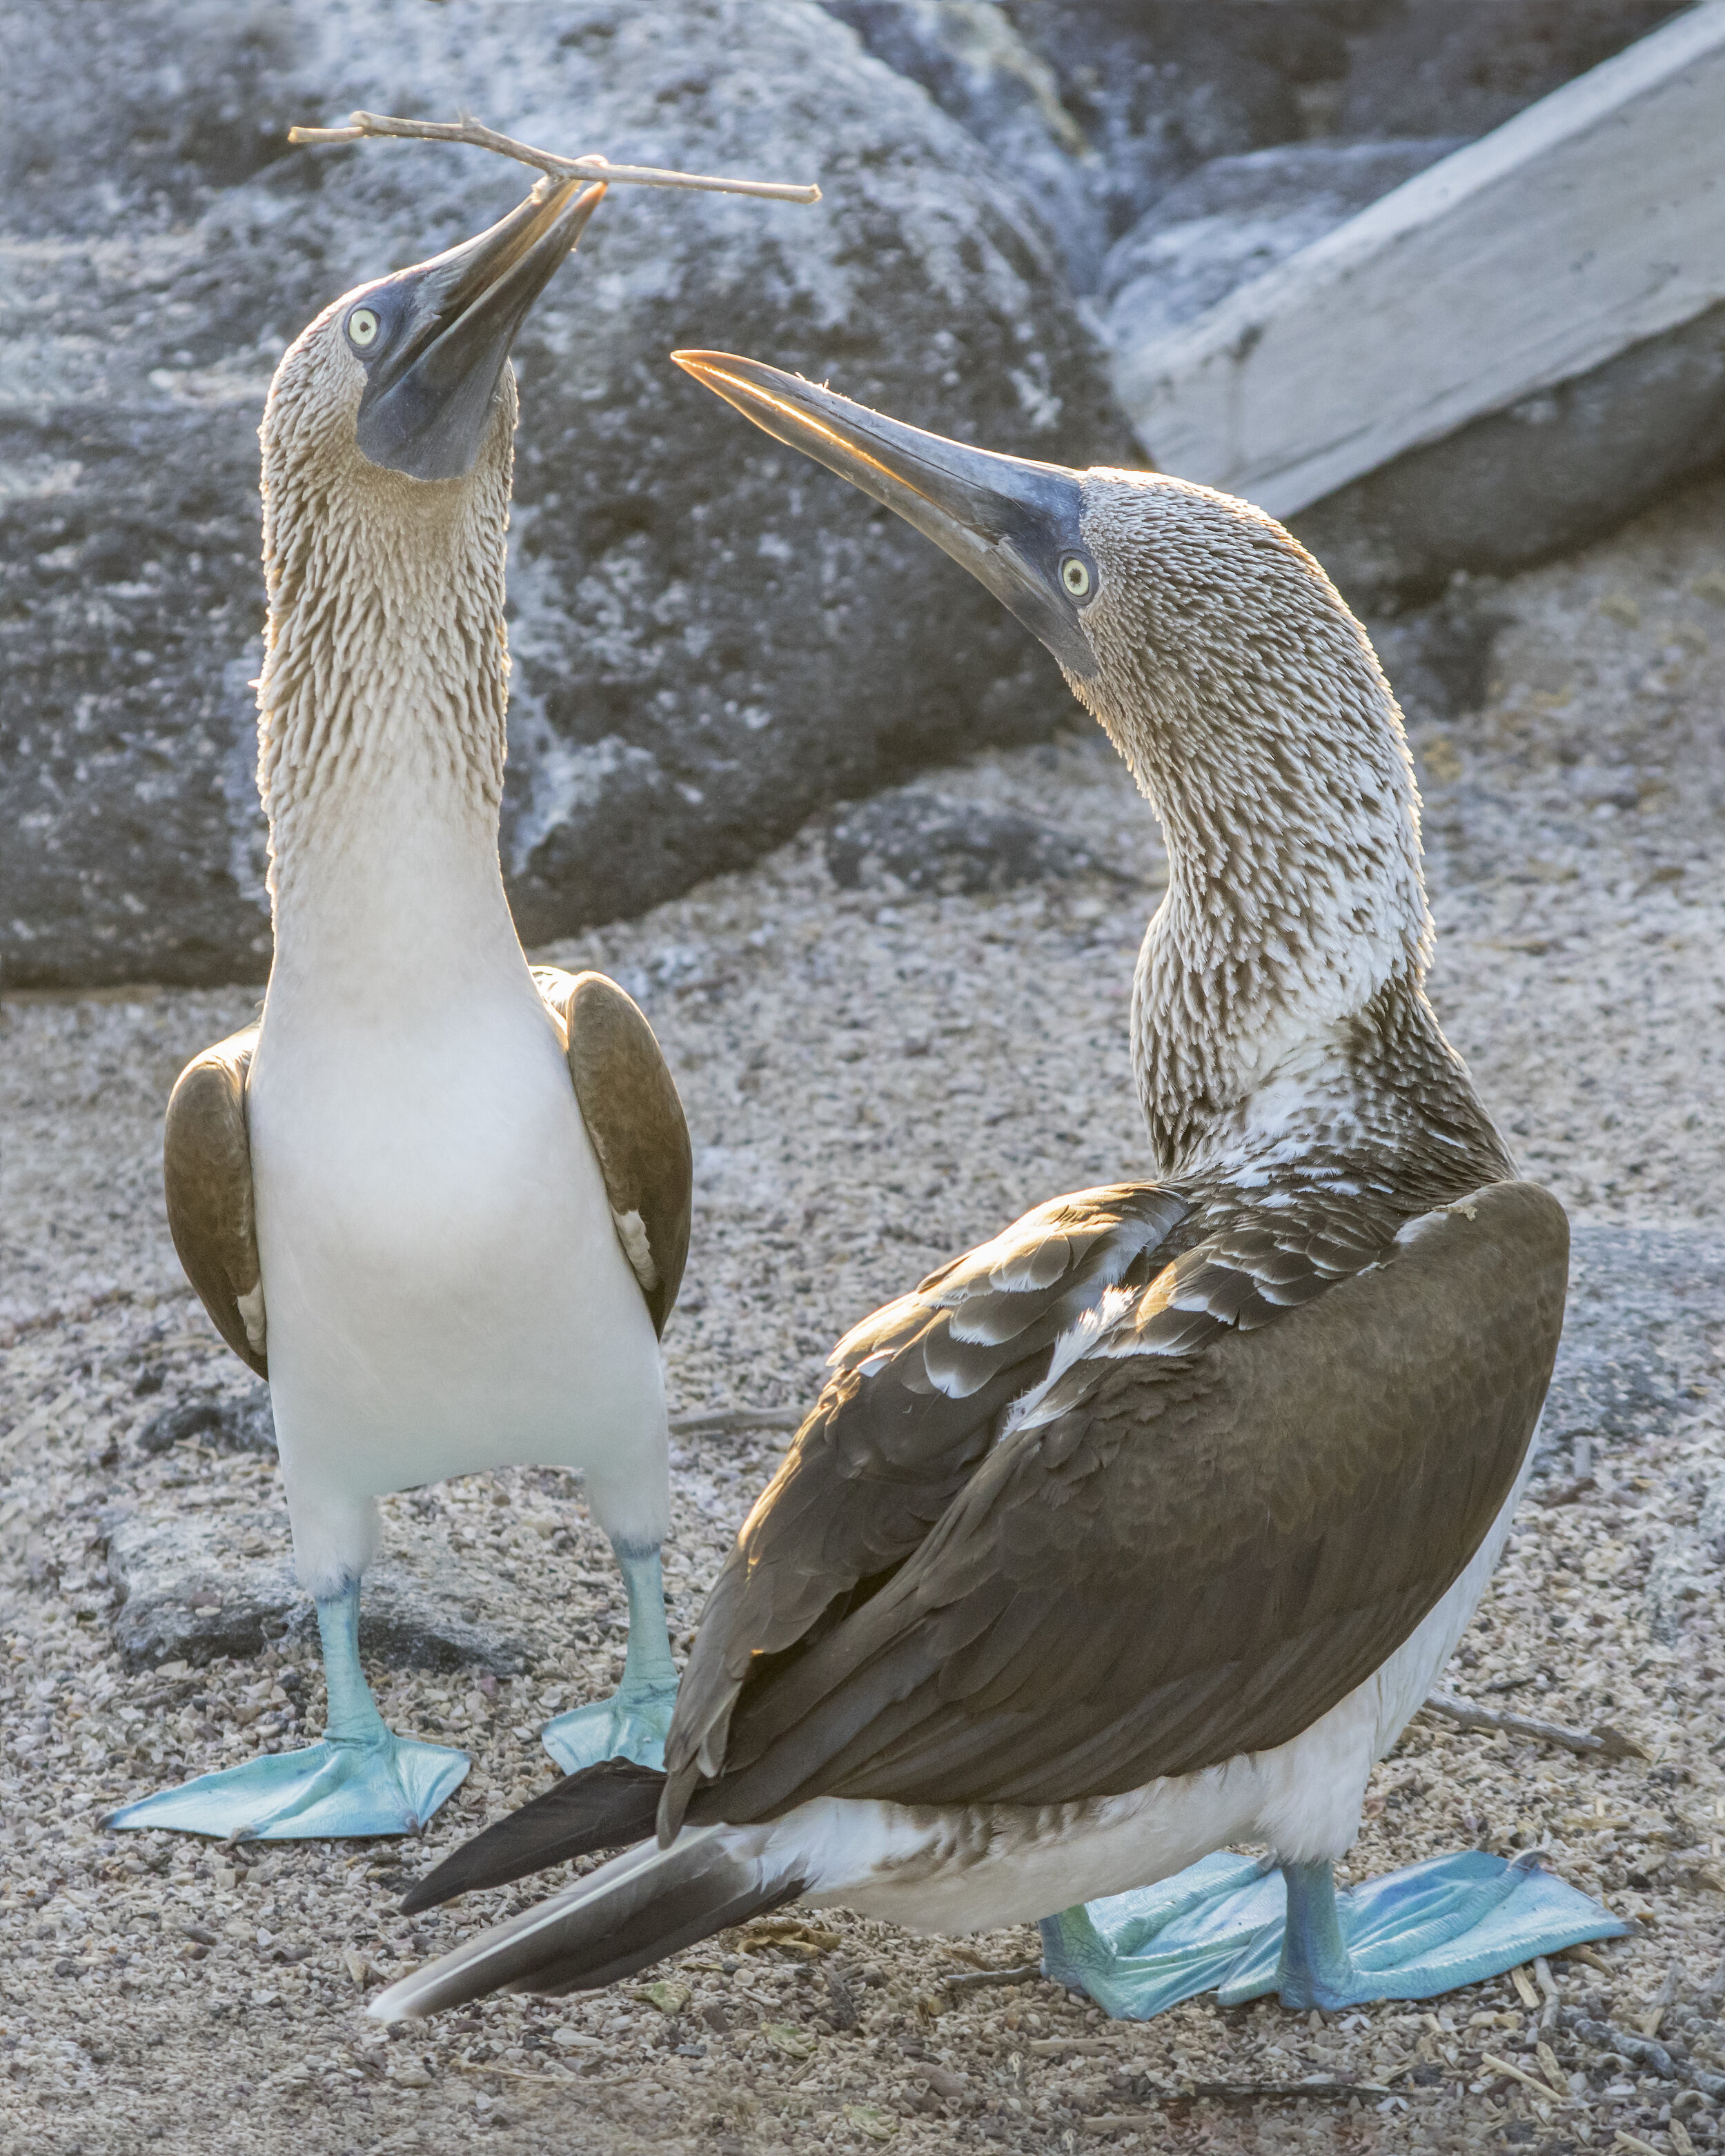 Nesting Blue-footed Boobies (Galapagos Islands)